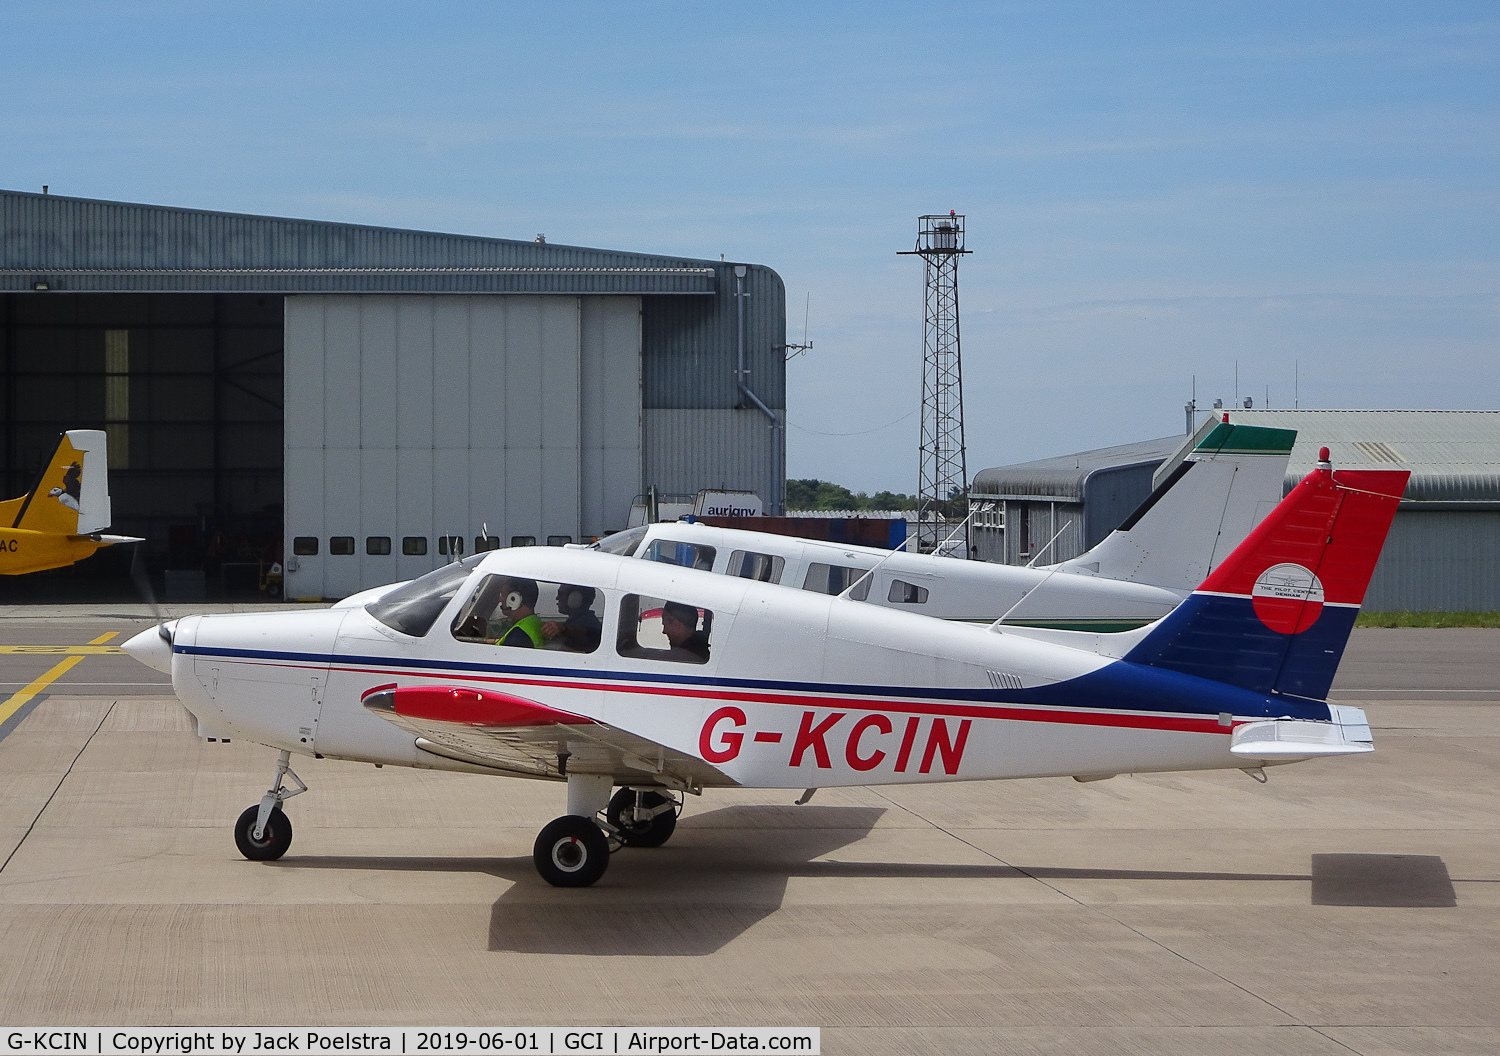 G-KCIN, 1989 Piper PA-28-161 Cadet C/N 2841102, G-KCIN in new colors at Guernsey